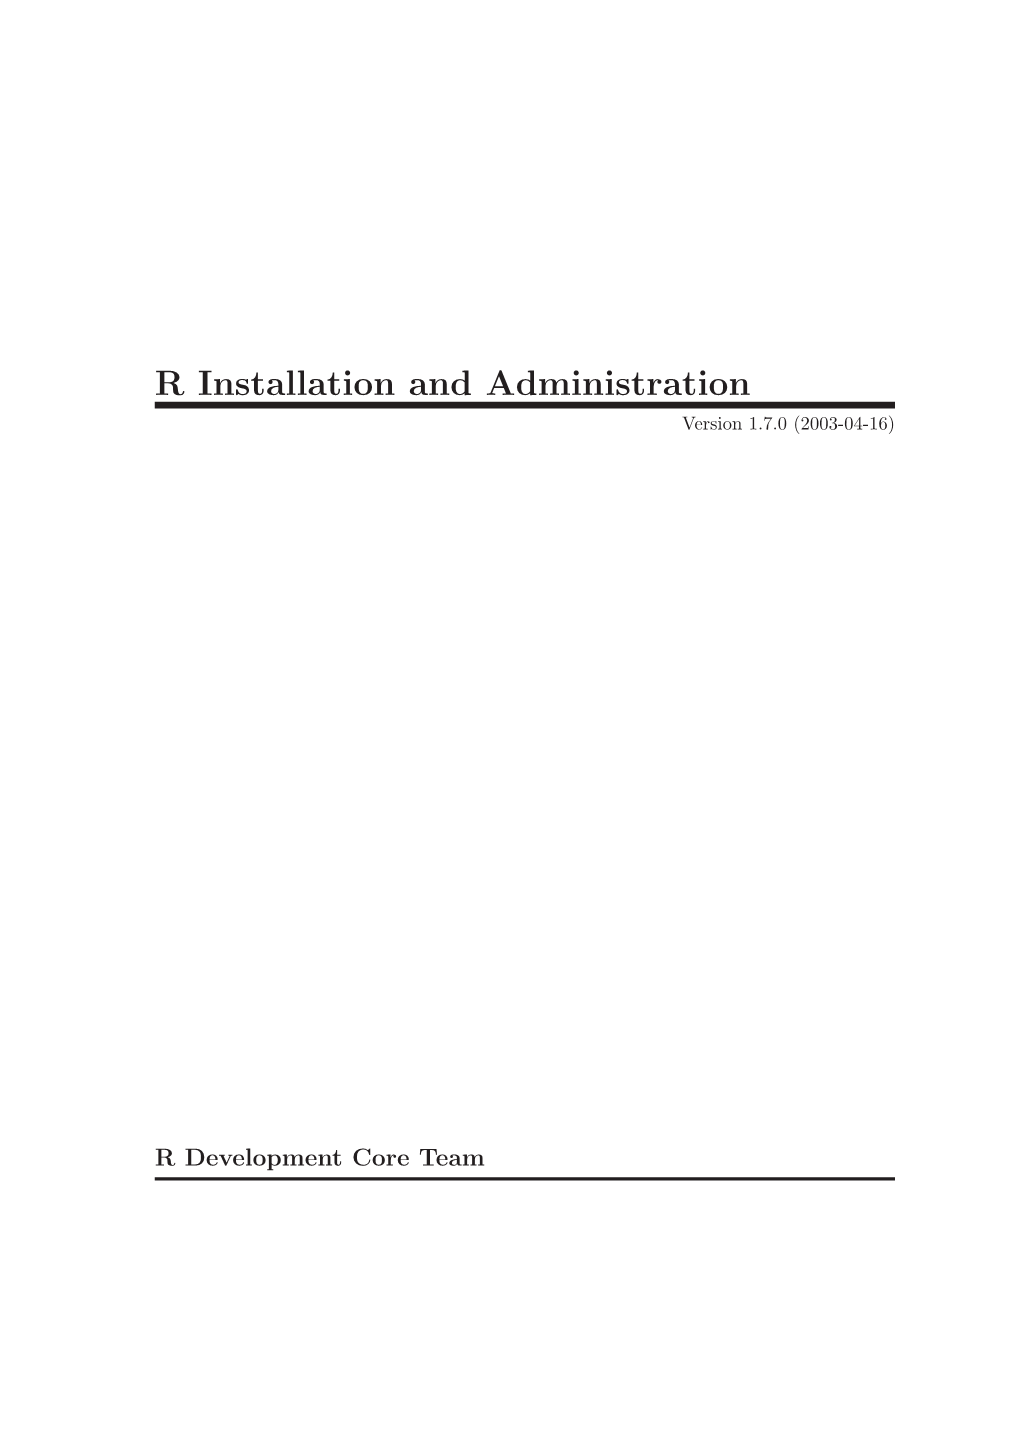 R Installation and Administration Version 1.7.0 (2003-04-16)